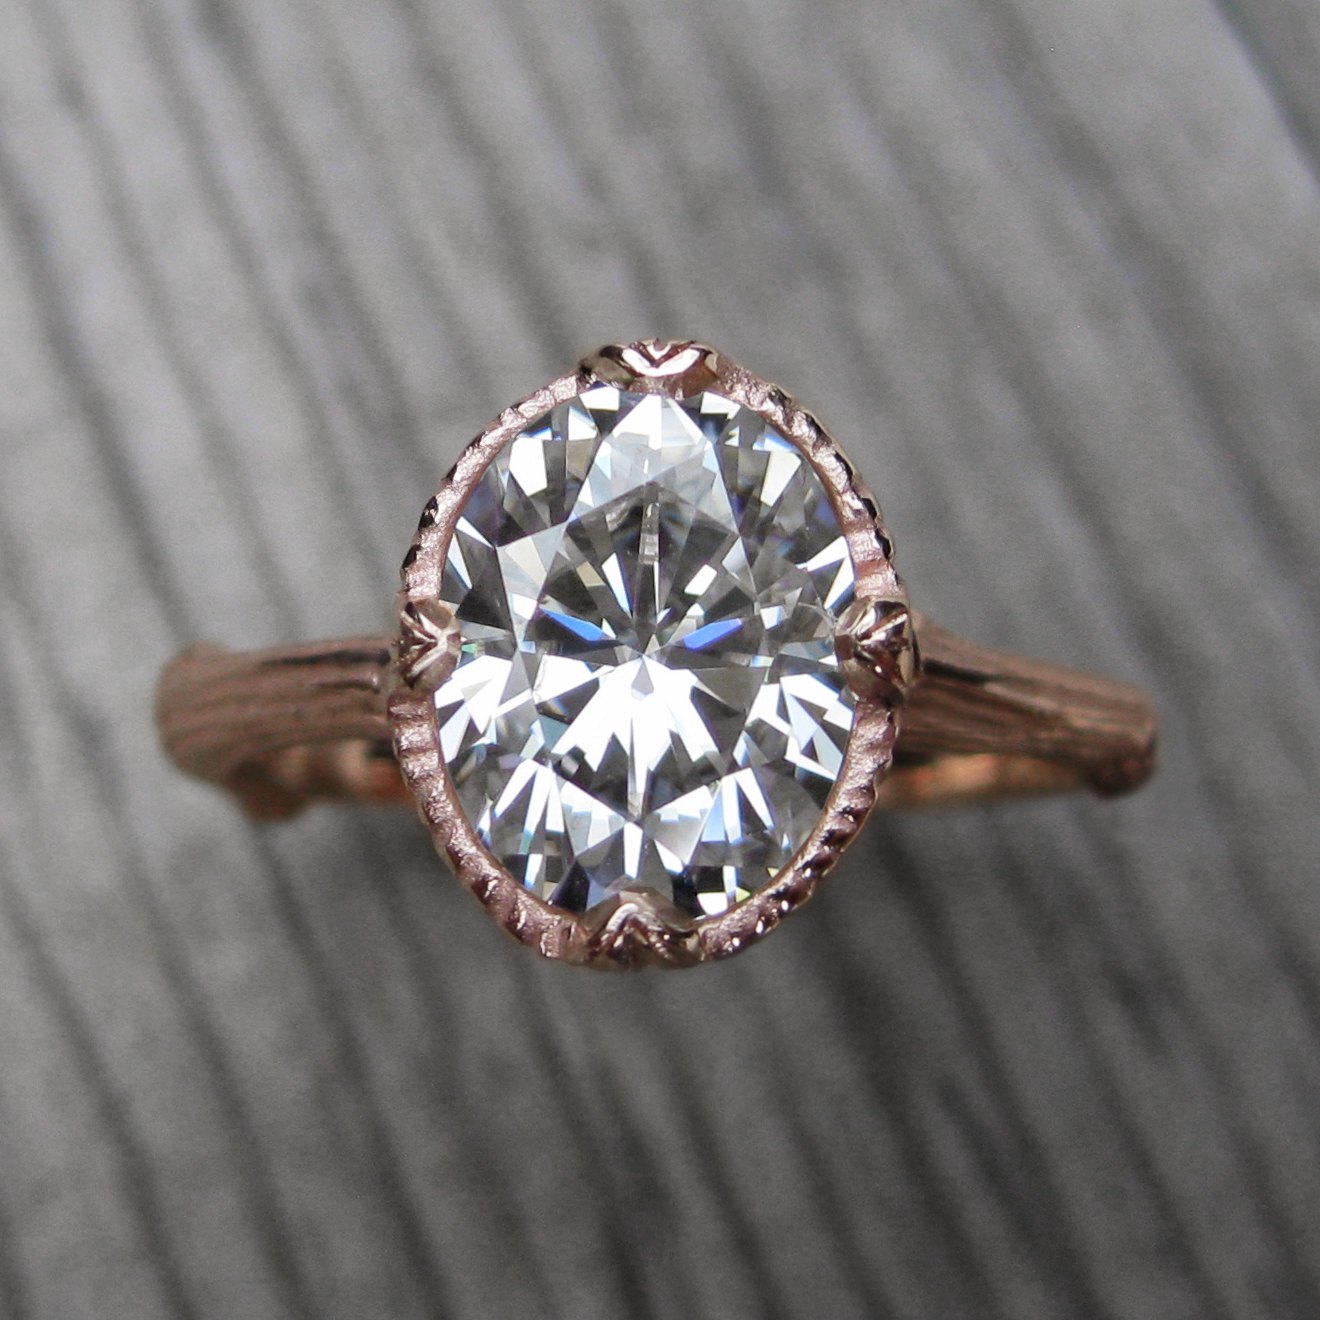 unique wedding rings unique engagement rings etsy | by kristin coffin | http://emmalinebride.com OYCUQLC